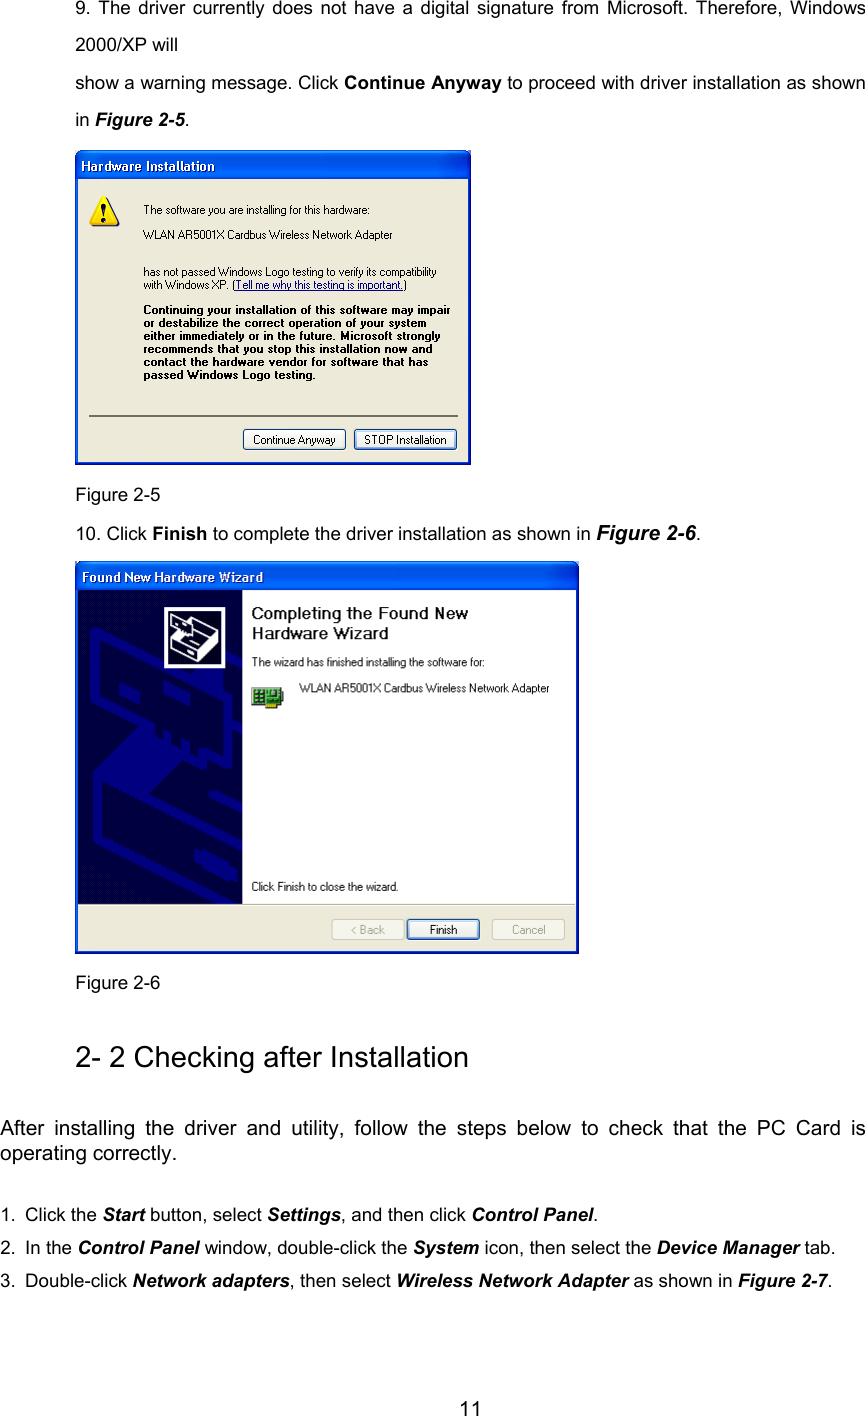         11 9. The driver currently does not have a digital signature from Microsoft. Therefore, Windows2000/XP will show a warning message. Click Continue Anyway to proceed with driver installation as shownin Figure 2-5.  Figure 2-5 10. Click Finish to complete the driver installation as shown in Figure 2-6.  Figure 2-6 2- 2 Checking after Installation After installing the driver and utility, follow the steps below to check that the PC Card isoperating correctly. 1. Click the Start button, select Settings, and then click Control Panel.2. In the Control Panel window, double-click the System icon, then select the Device Manager tab.3. Double-click Network adapters, then select Wireless Network Adapter as shown in Figure 2-7.